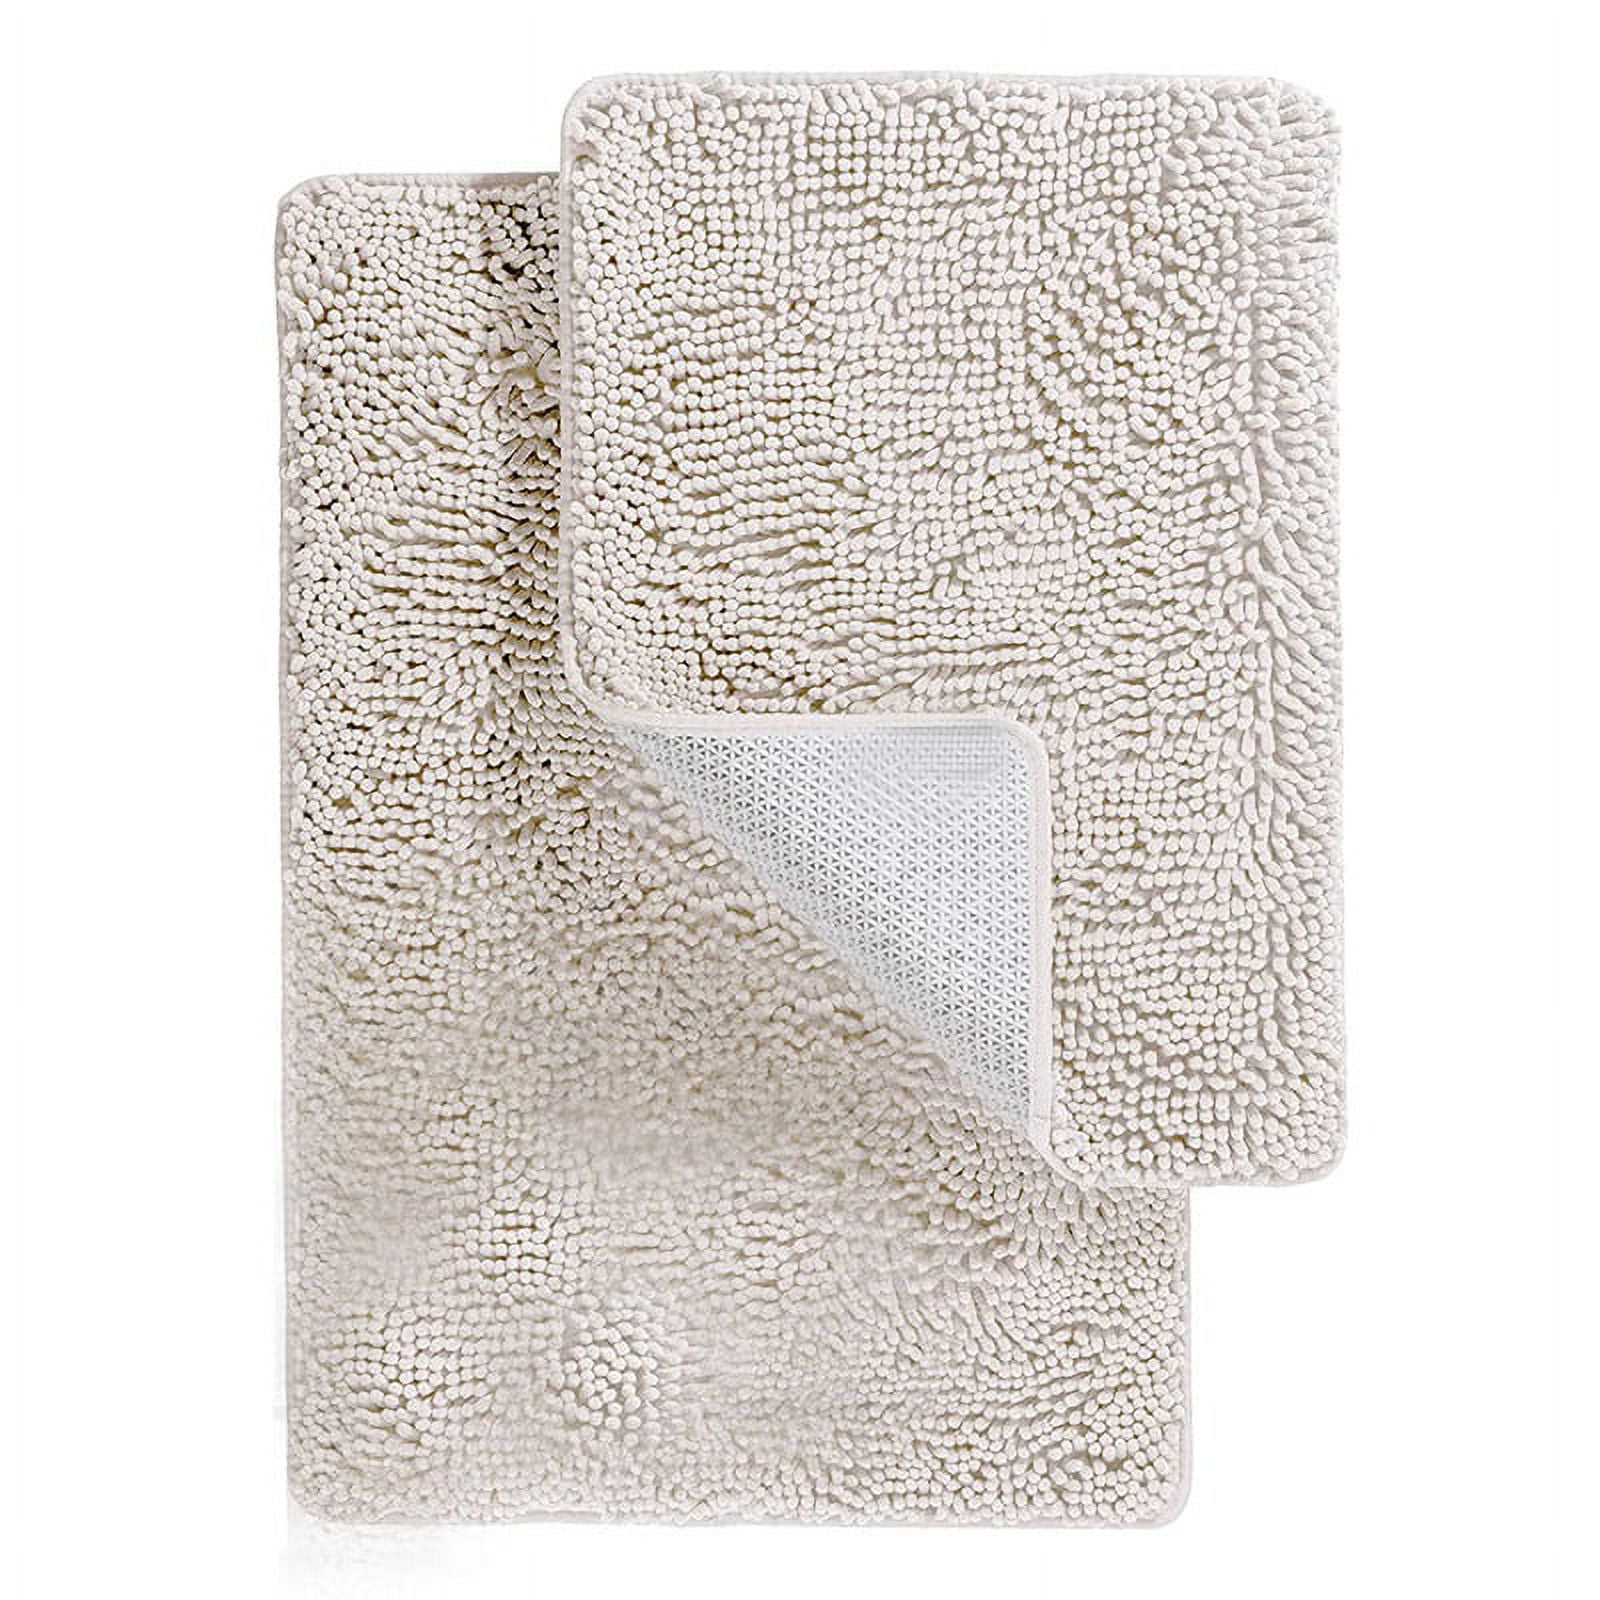 BYSURE Ivory/Cream Bathroom Rugs Sets 3 Piece Non Slip Extra Absorbent  Plush Chenille Soft Washable Bath Rugs and Mats Set